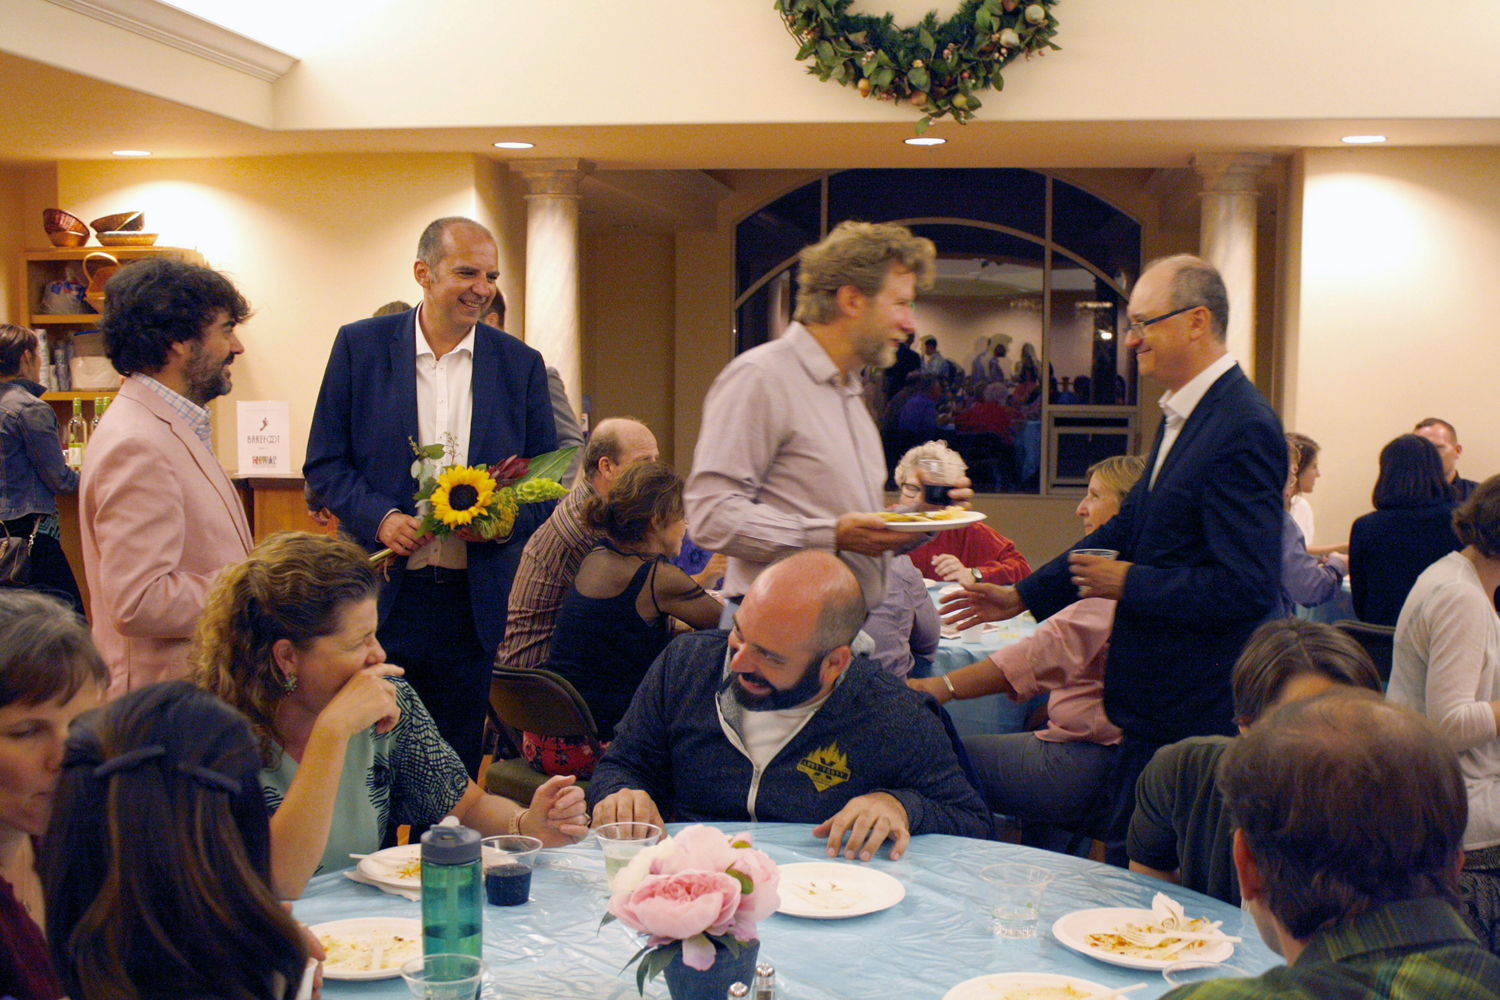 Composers and musicians mingle and relax at the opening night cast party. (staff photo)